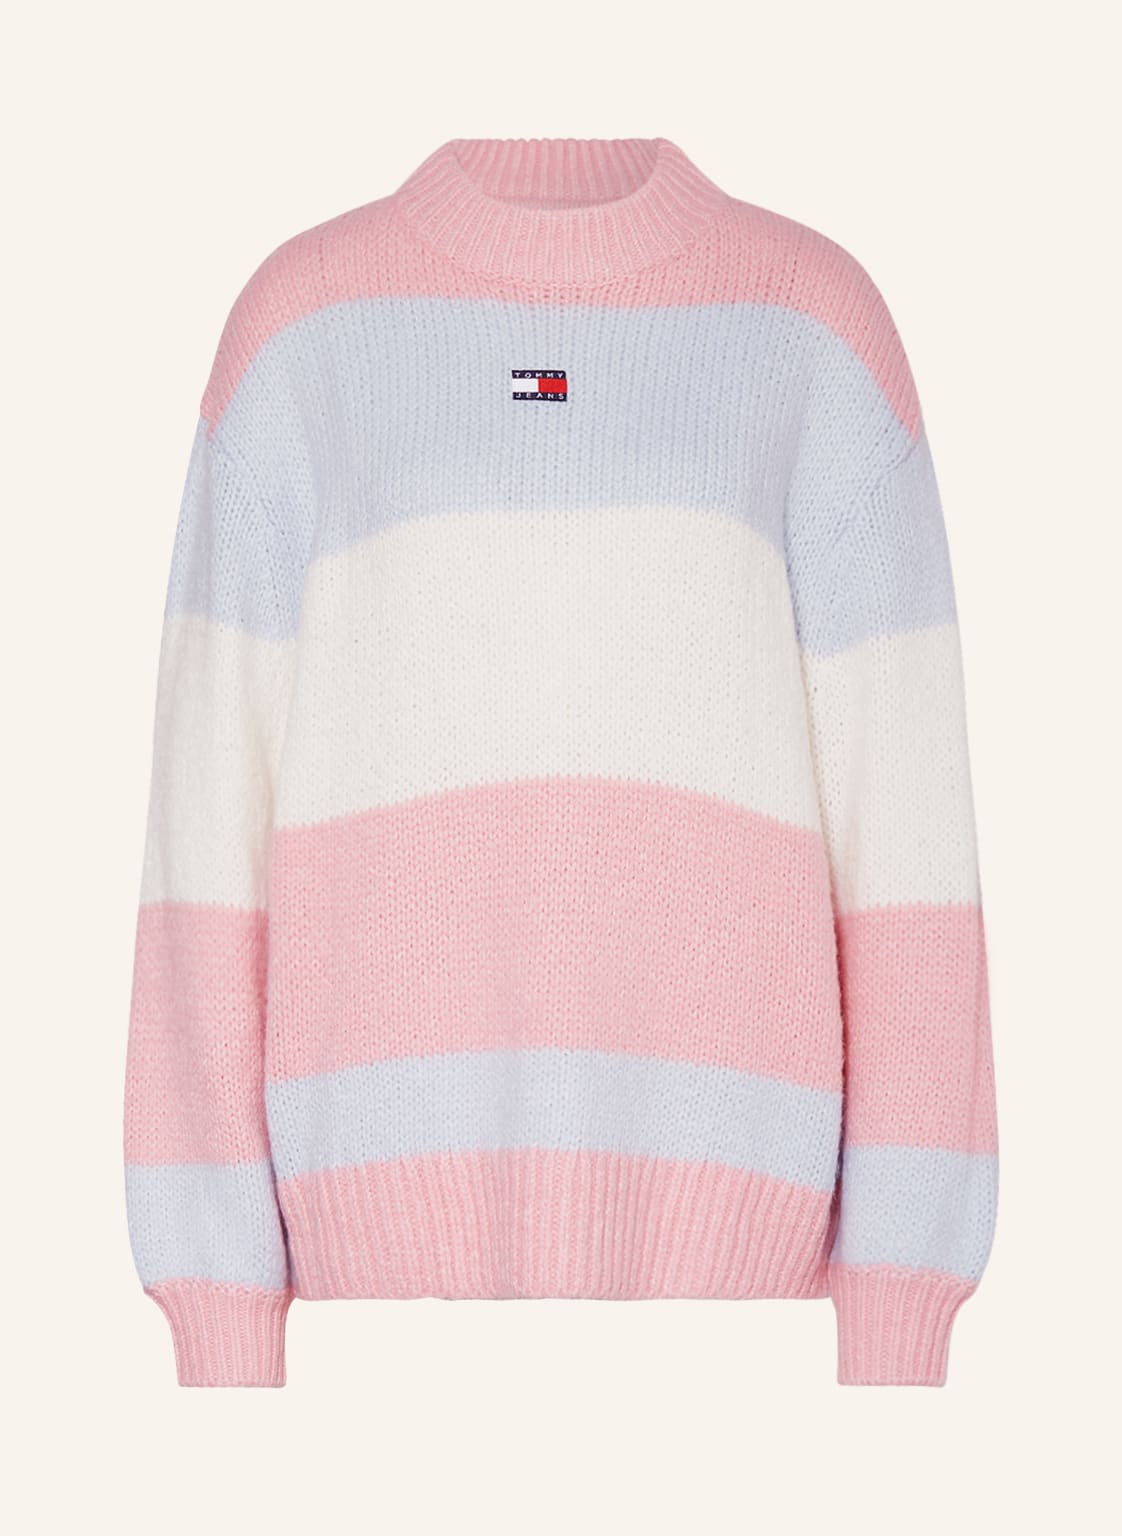 Tommy Jeans Pullover pink von Tommy Jeans